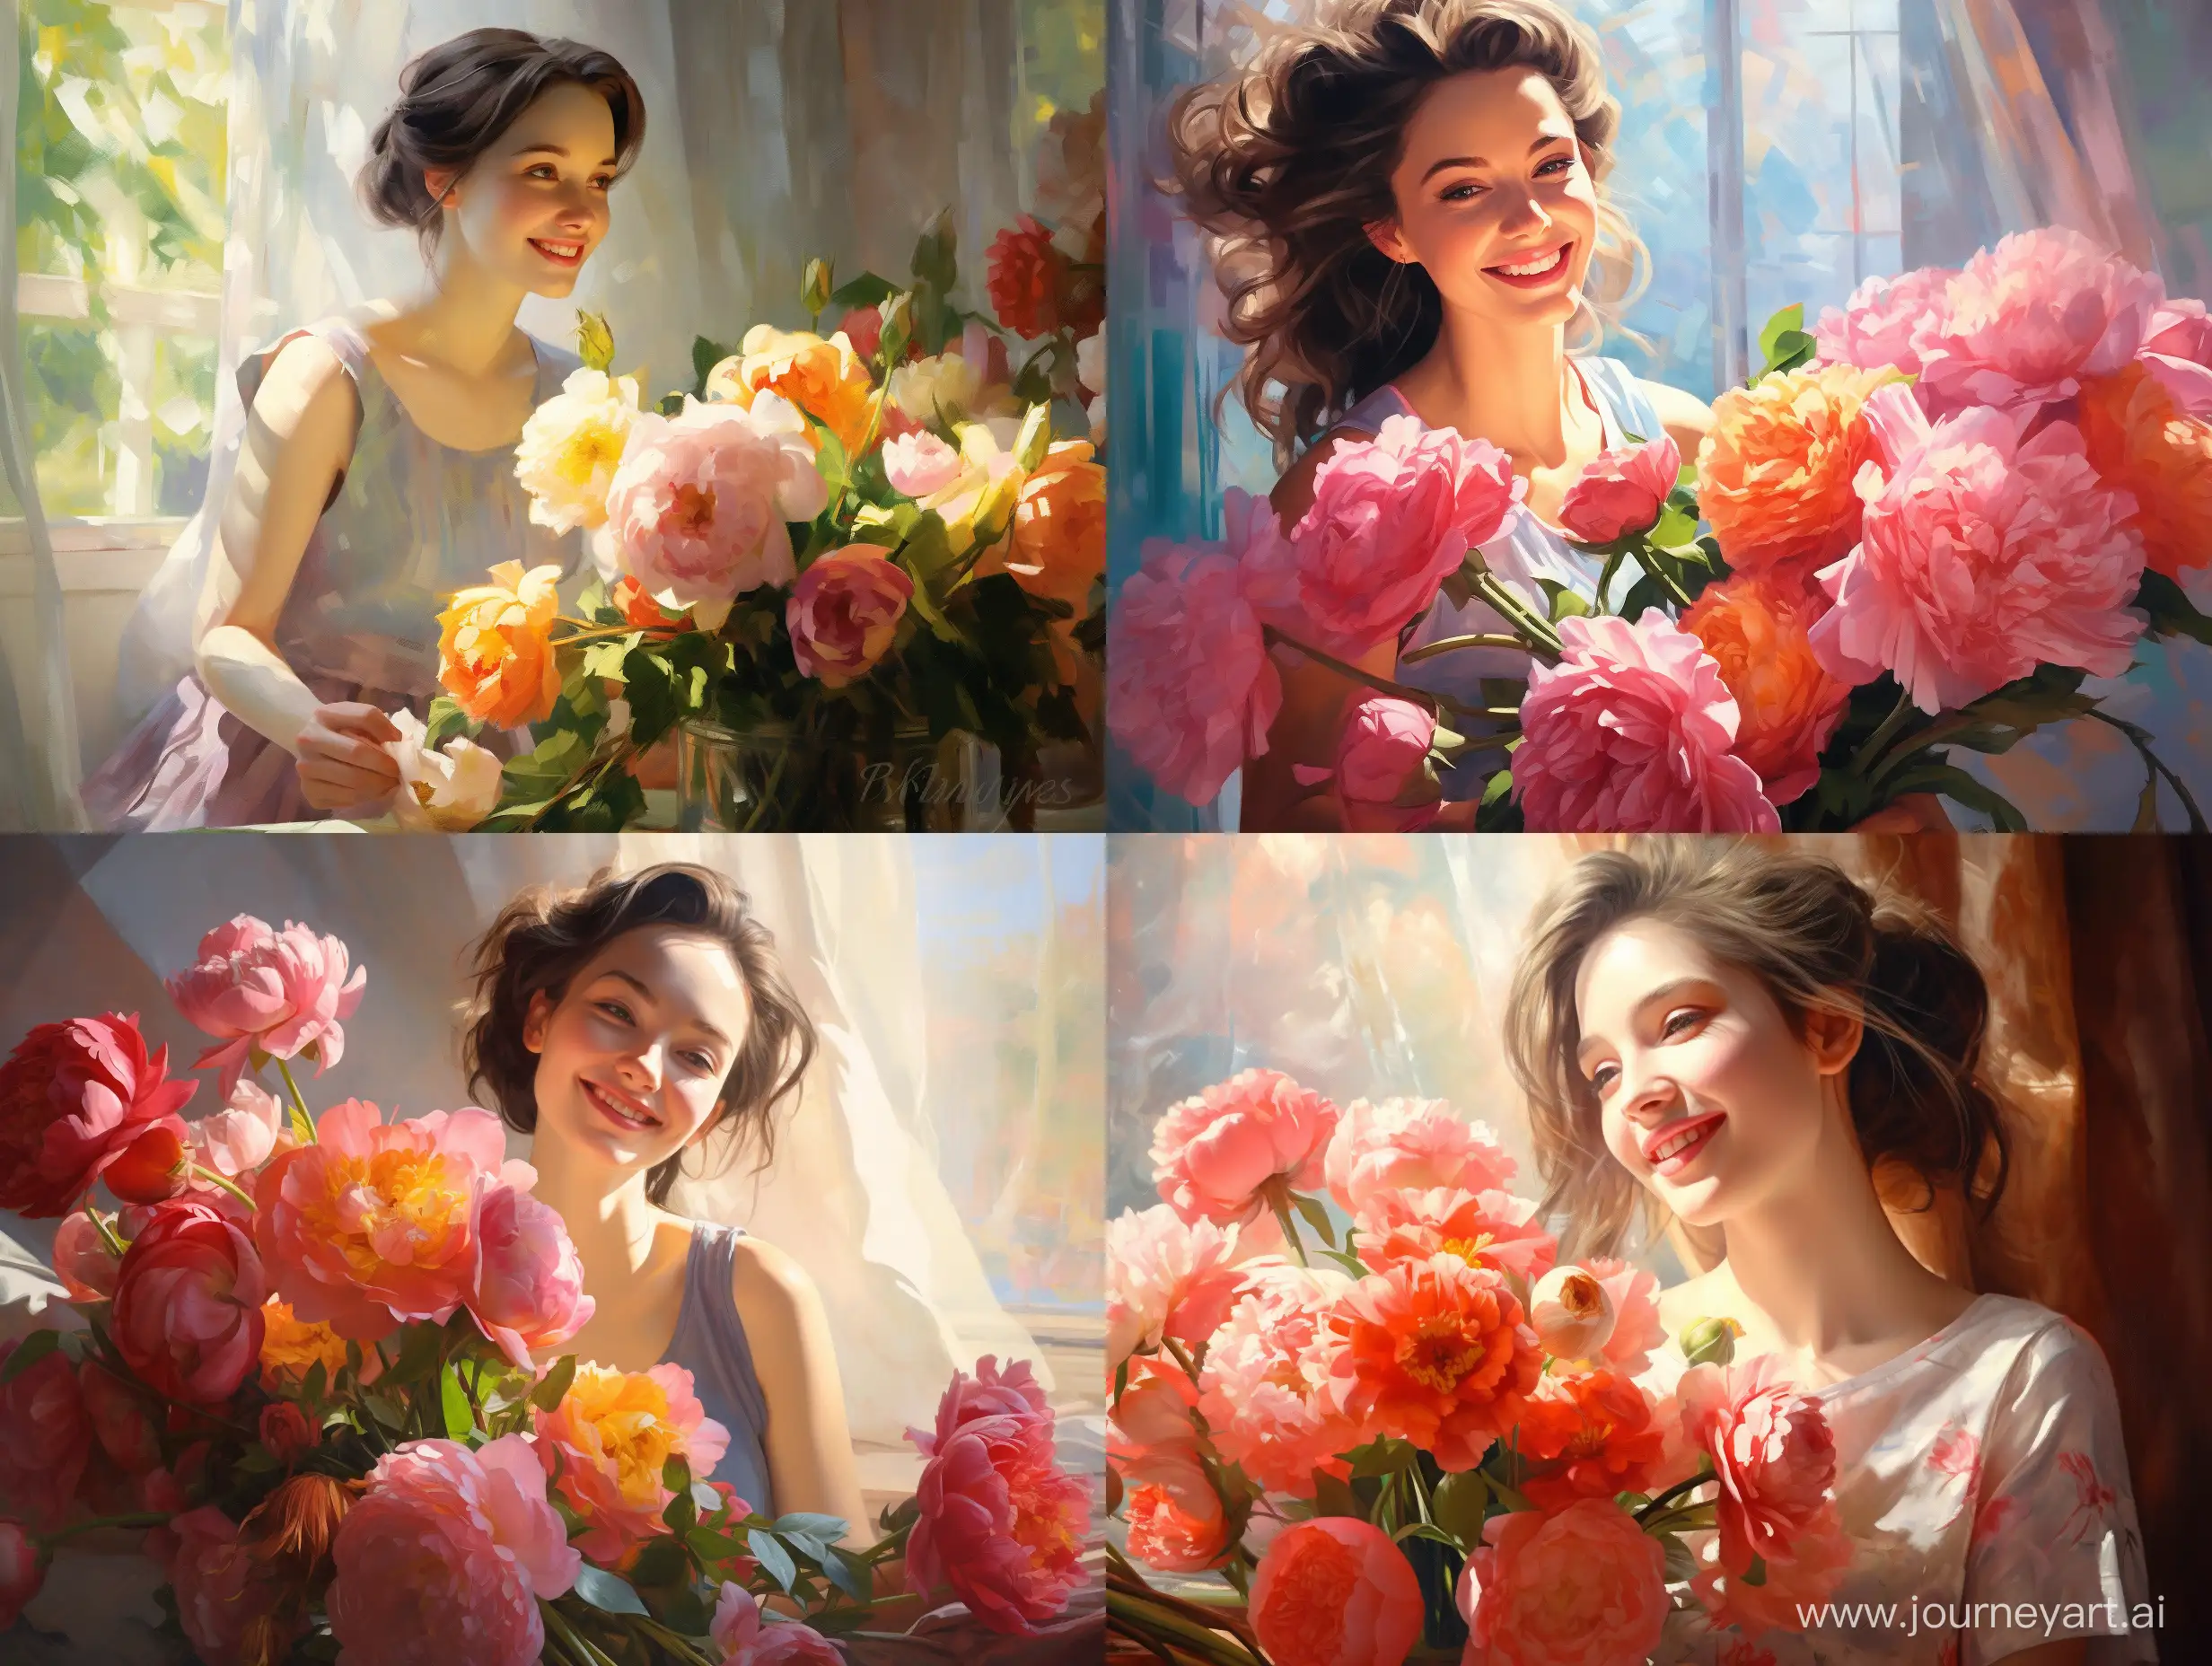 Joyful-Woman-Delighted-with-Vibrant-Peony-and-Rose-Bouquet